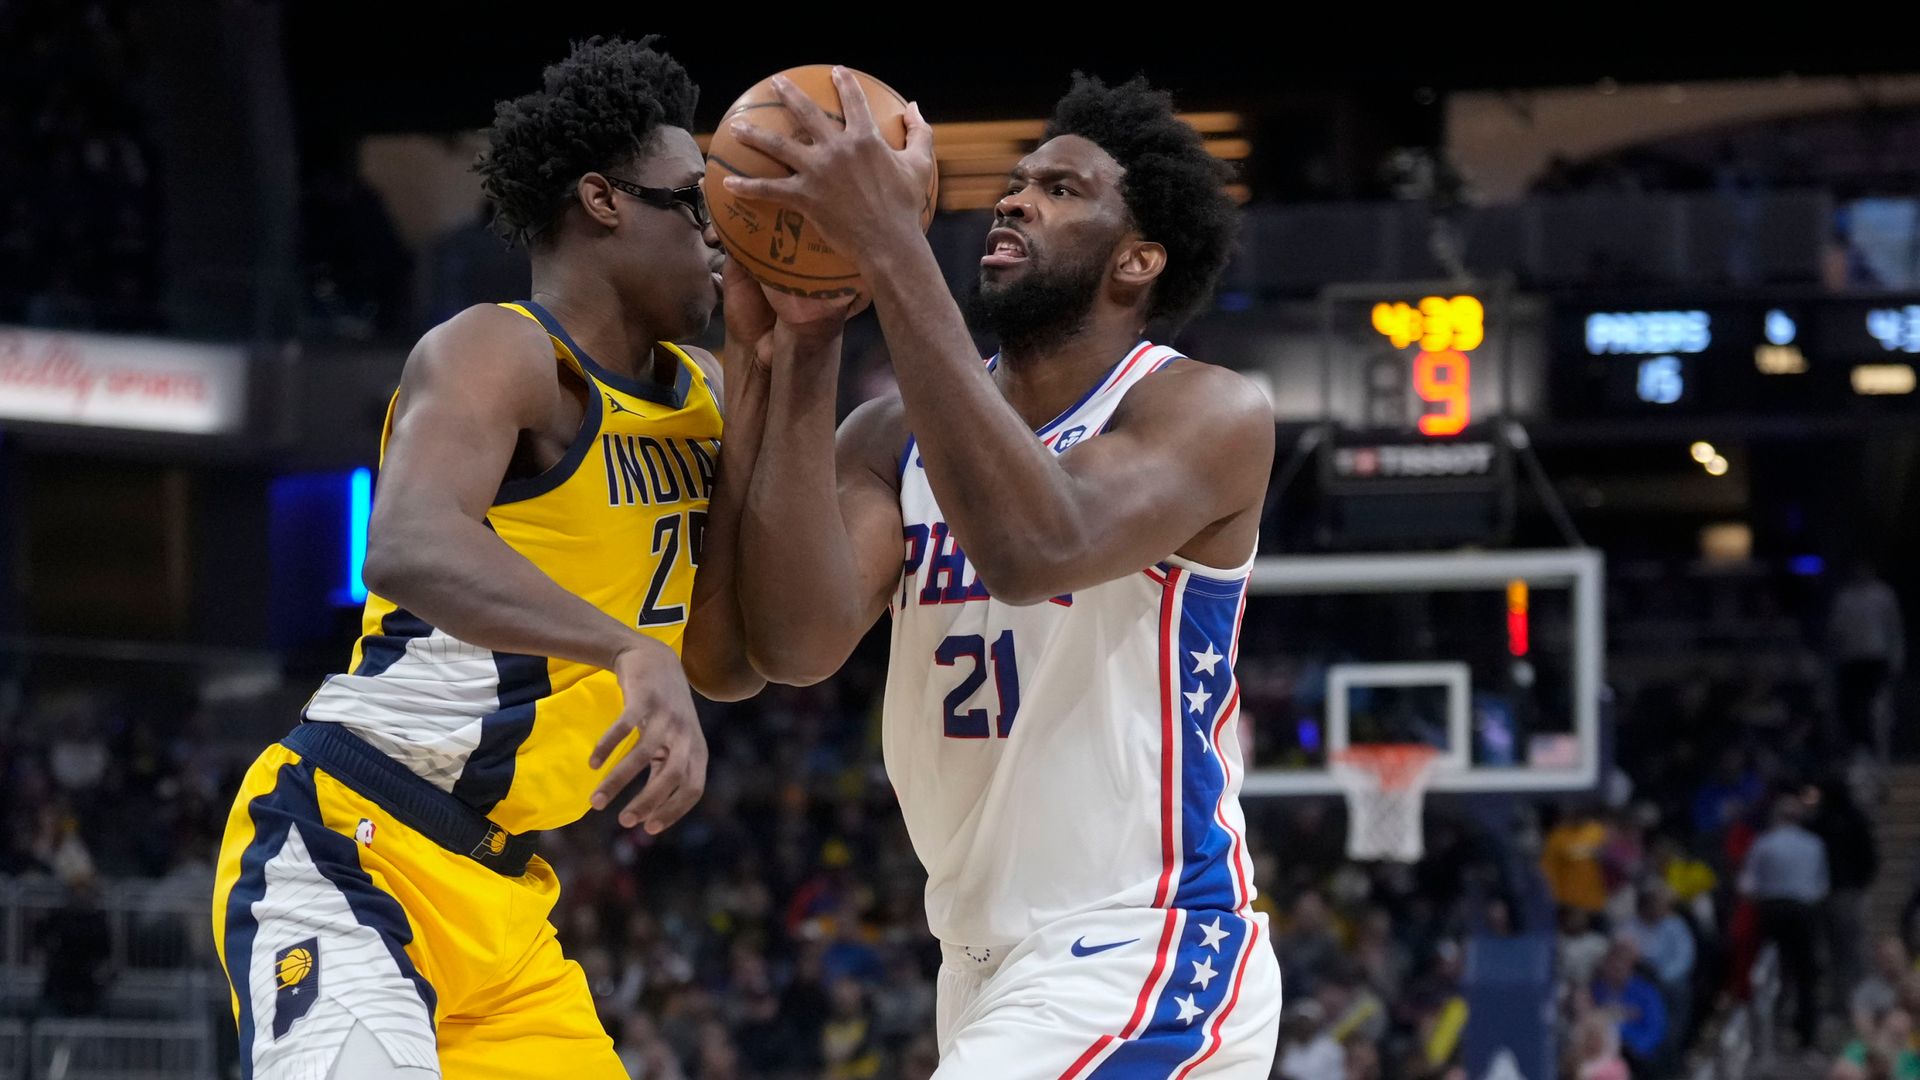 76ers' Embiid described as 'walking cheat code'